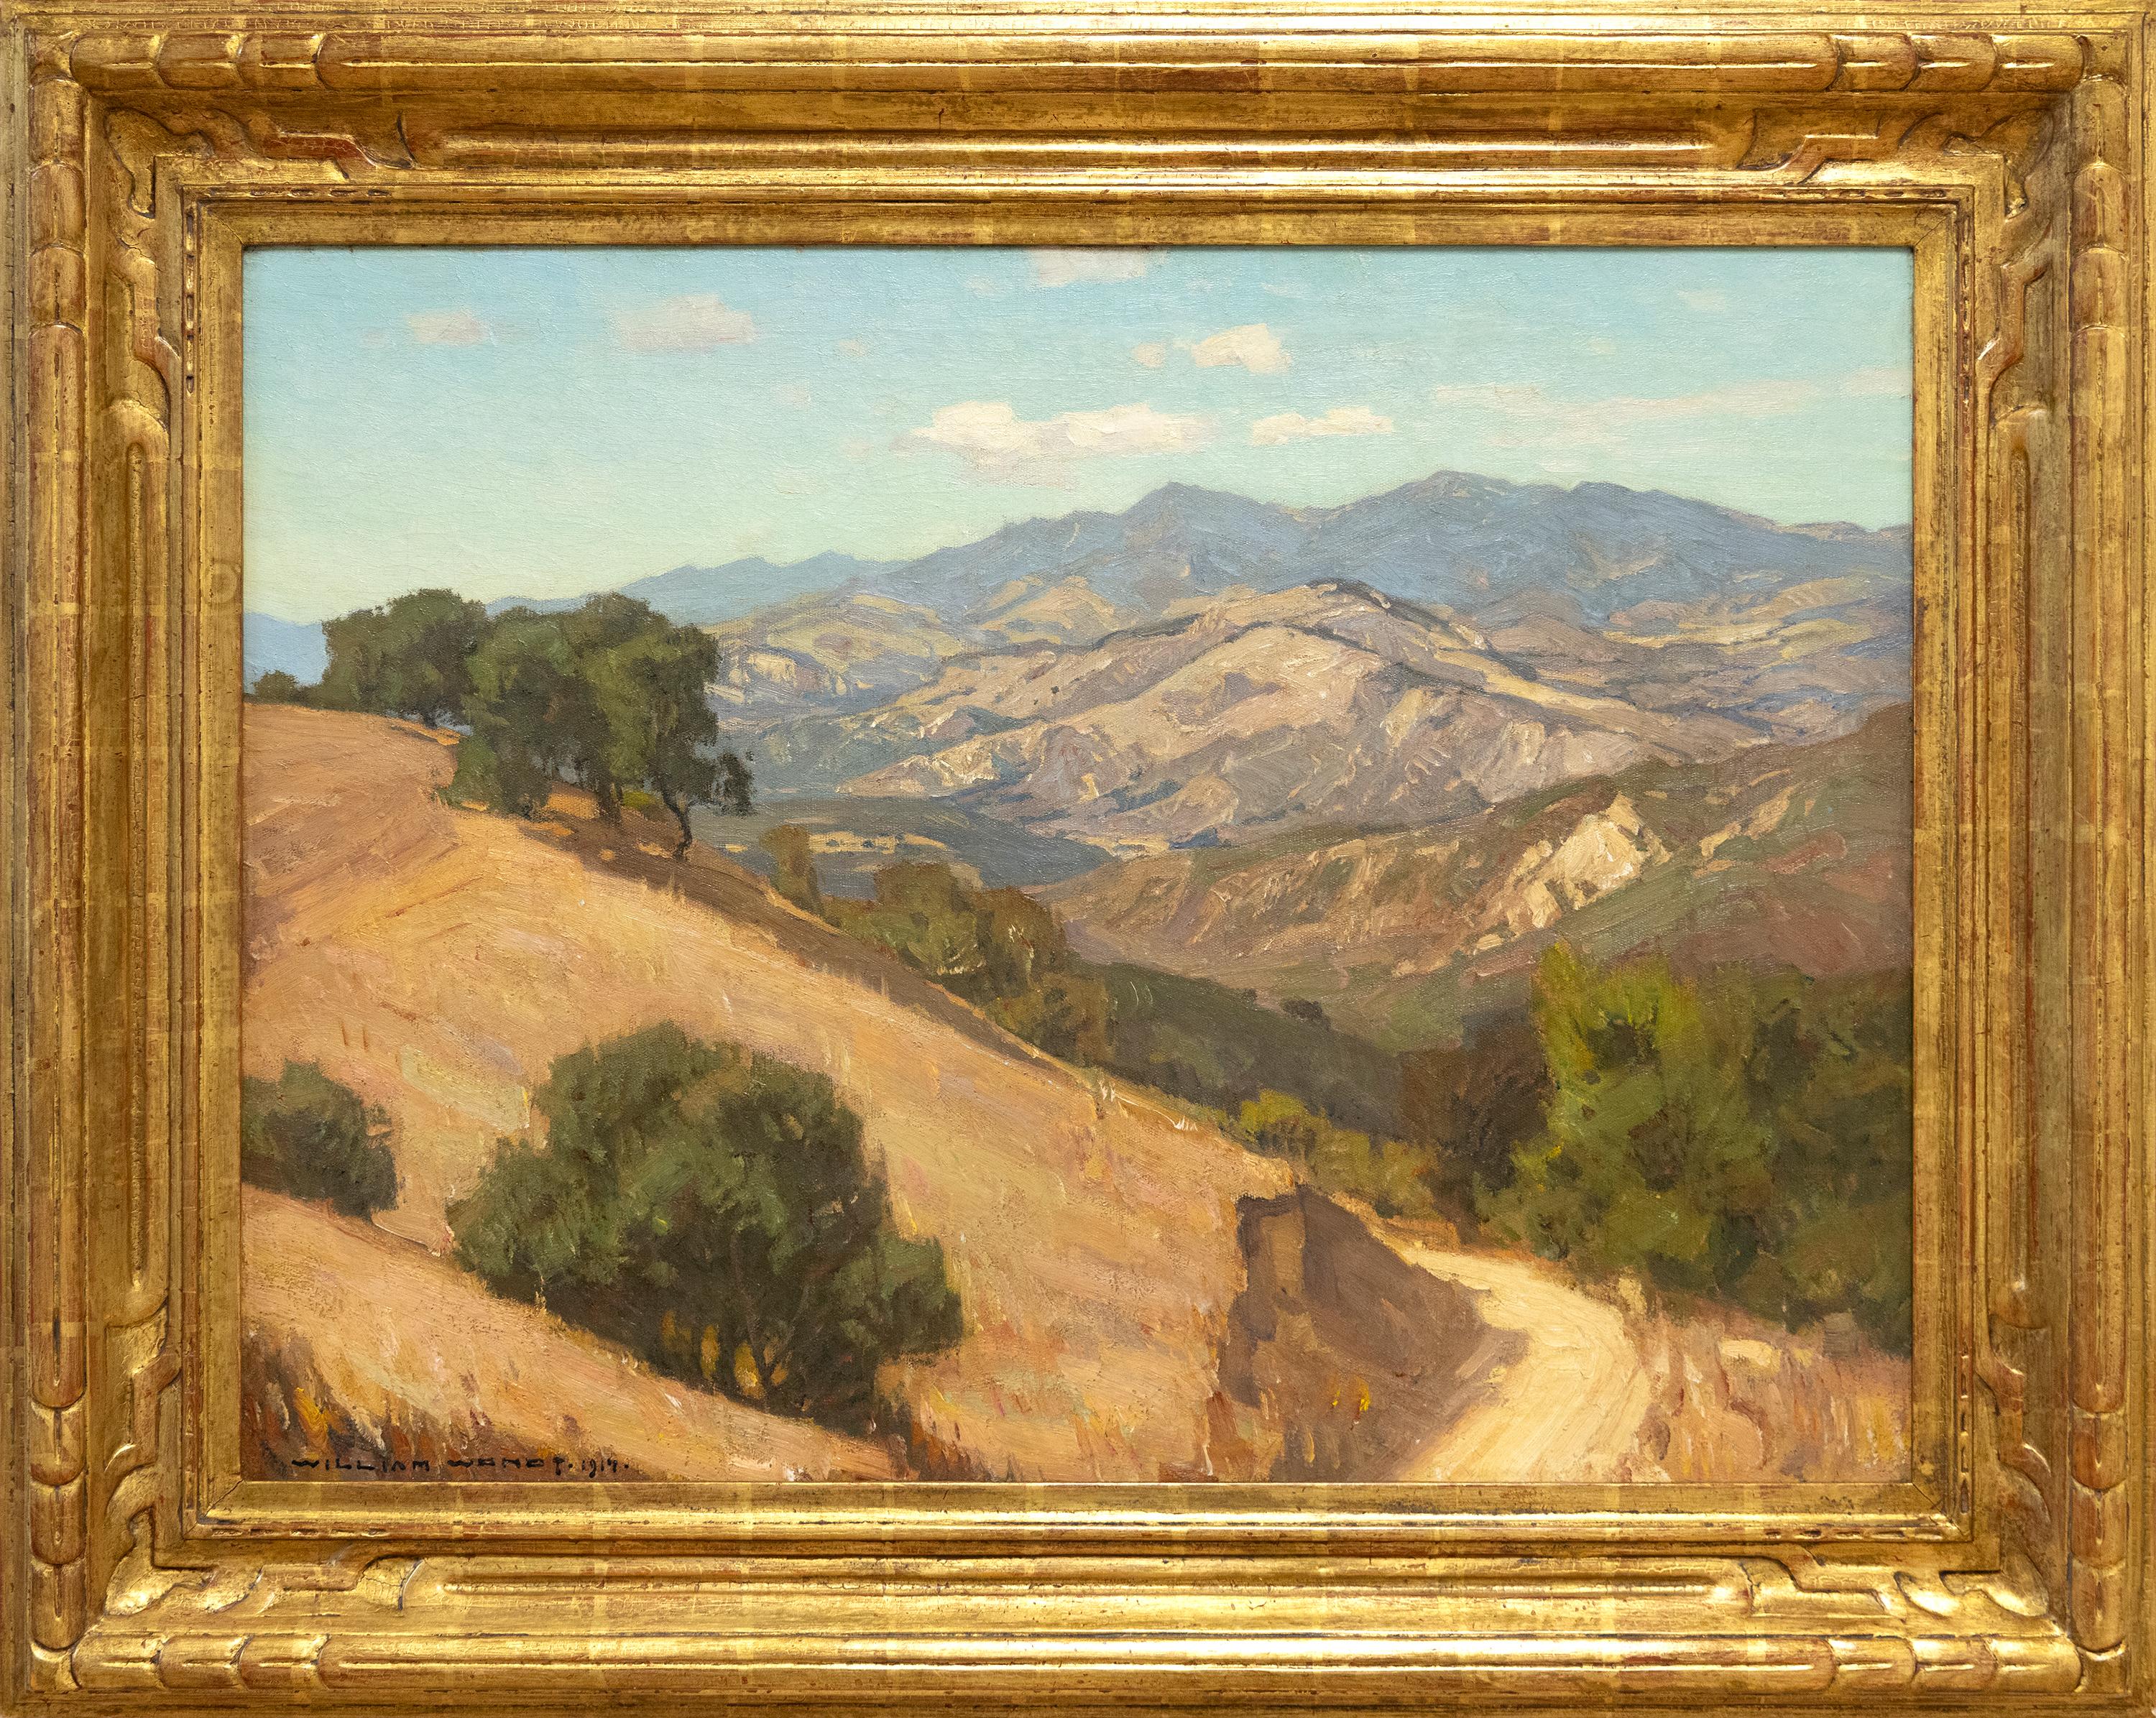 California Landscape - Painting by William Wendt